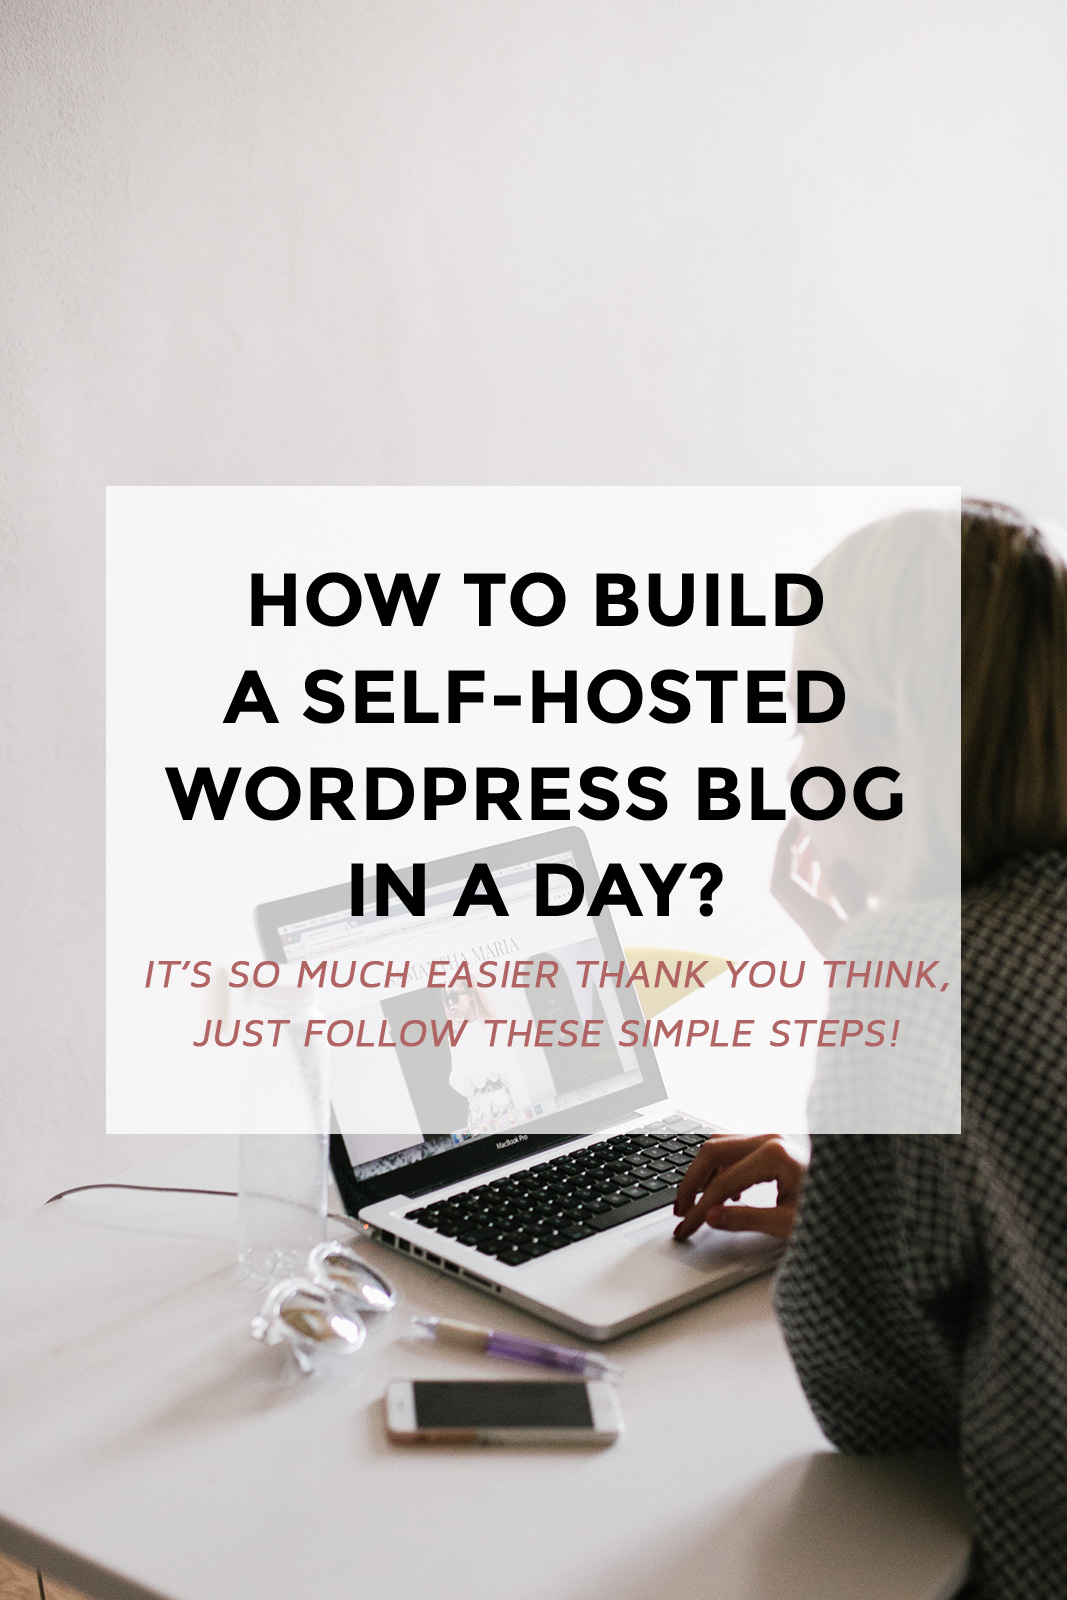 Lately, I've been getting a lot of questions about starting a Wordpress blog. It seems like a lot of people think like it's a long, complicated process, but in reality, it all can be accomplished in less than a day! Click through, follow the steps & you're done! (blogging tips, wordpress blog, wordpress installation, business tips, tips for bloggers)